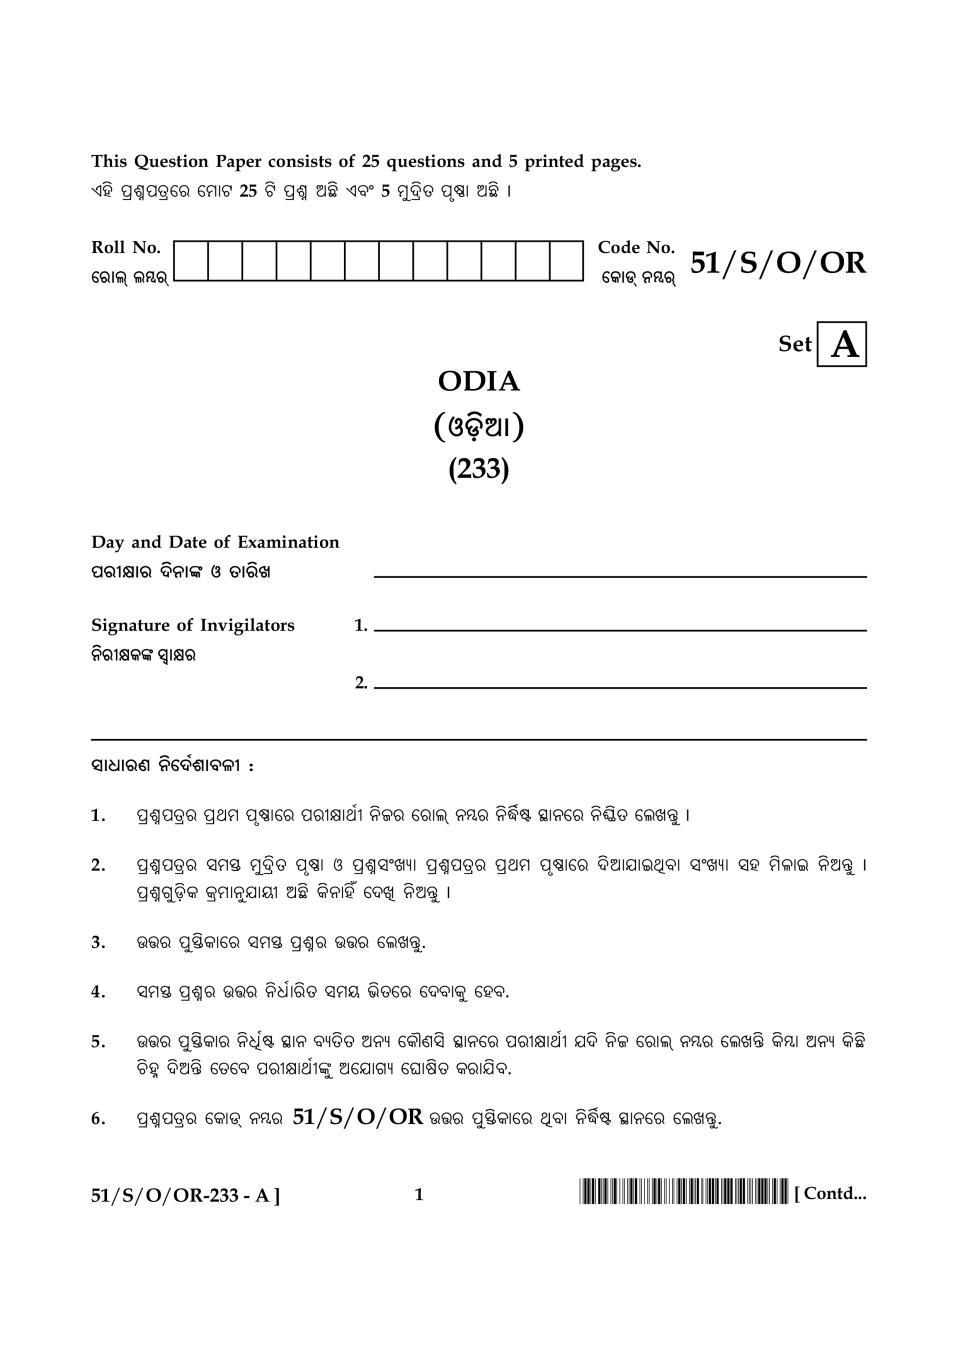 NIOS Class 10 Question Paper Oct 2015 - Odia - Page 1